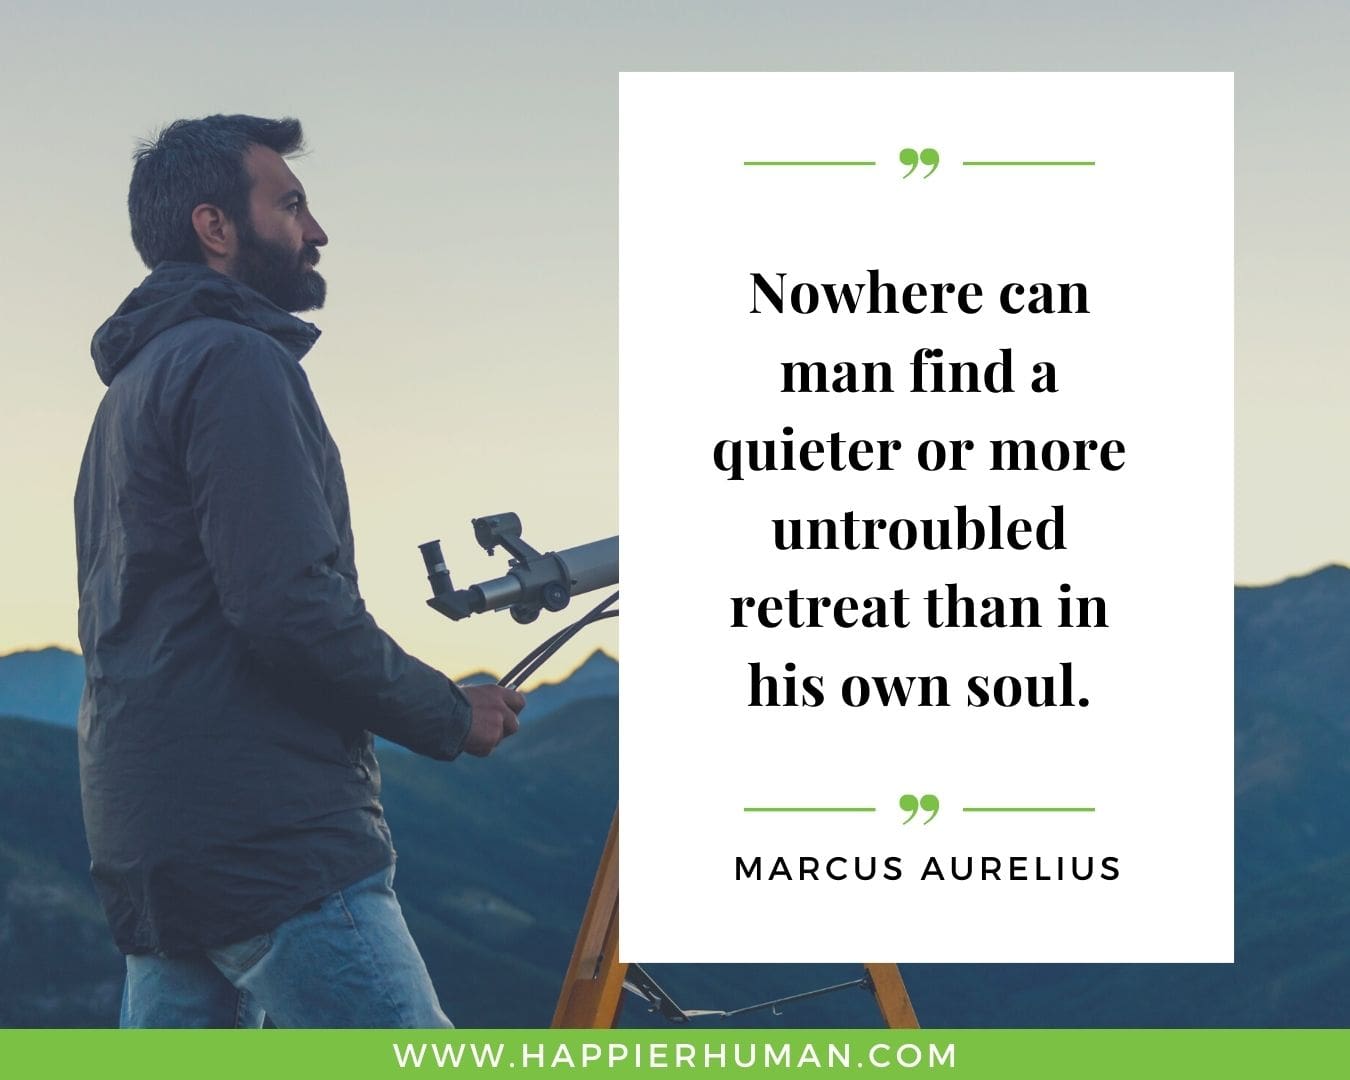 Introvert Quotes - “Nowhere can man find a quieter or more untroubled retreat than in his own soul.” – Marcus Aurelius